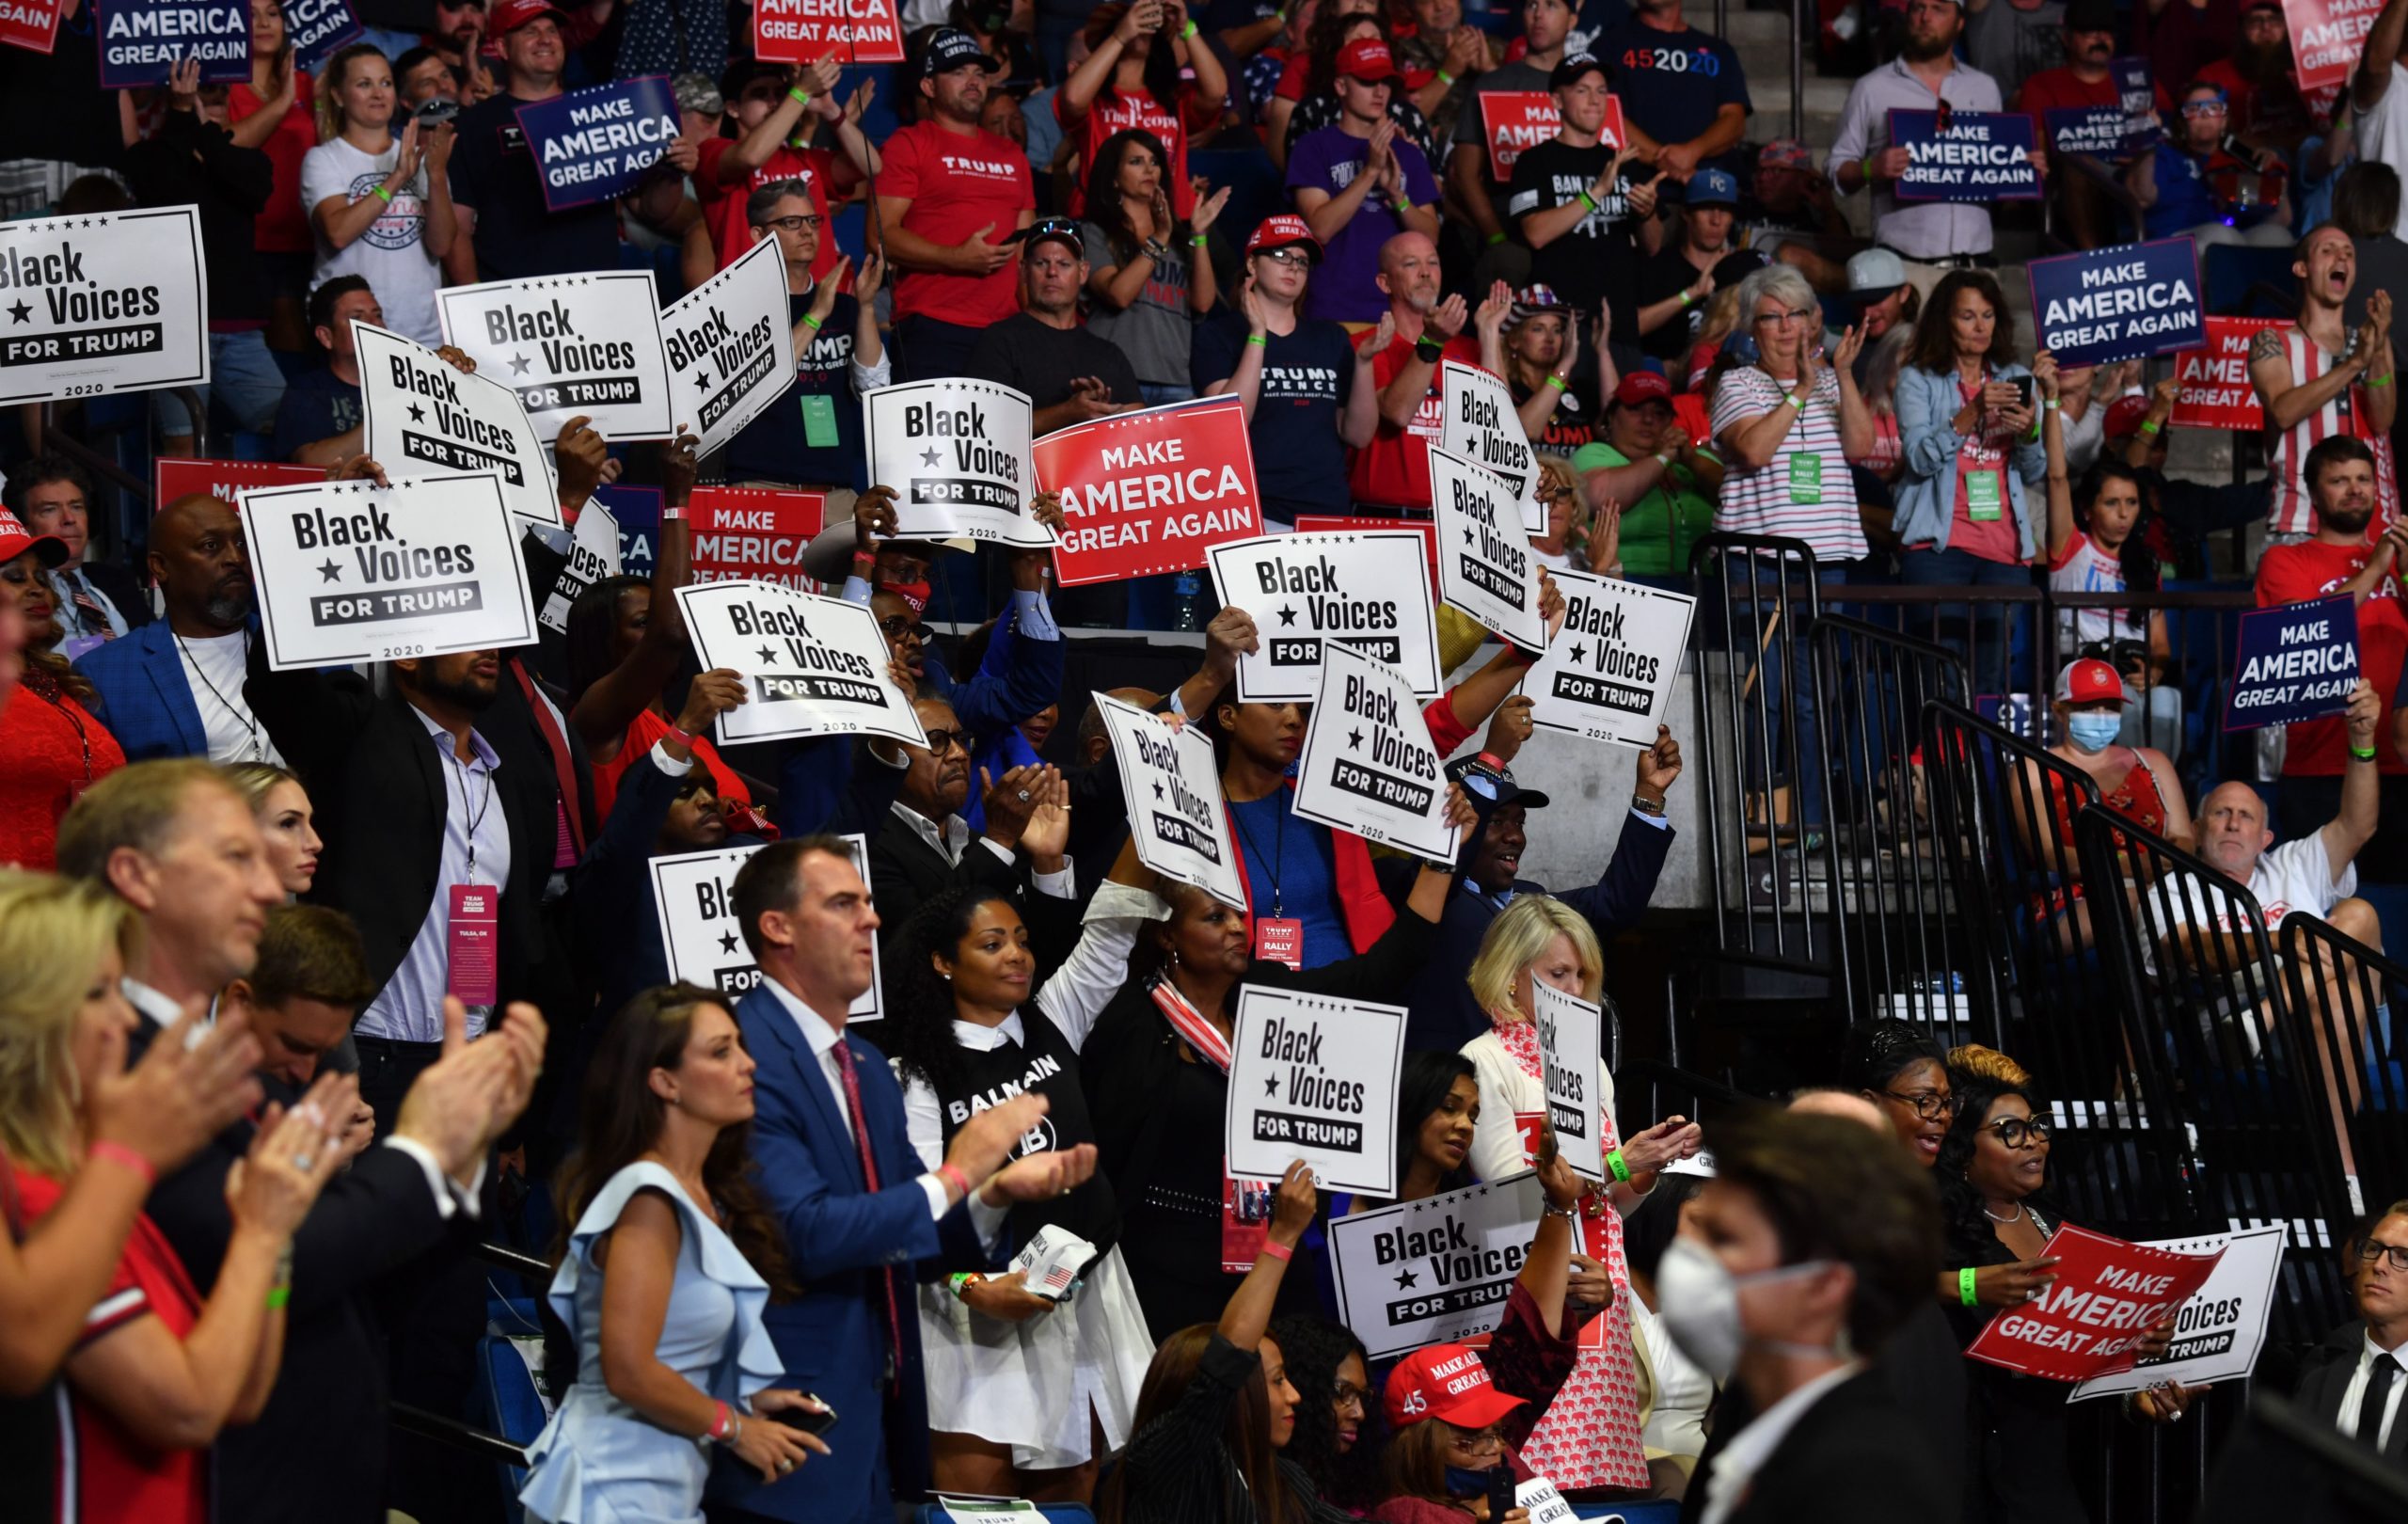 Governor Kevin Stitt claps among "Black Voices for Trump" supporters as US President Donald Trump speaks during a campaign rally at the BOK Center on June 20, 2020 in Tulsa, Oklahoma. - Hundreds of supporters lined up early for Donald Trump's first political rally in months, saying the risk of contracting COVID-19 in a big, packed arena would not keep them from hearing the president's campaign message. (Photo by Nicholas Kamm / AFP) (Photo by NICHOLAS KAMM/AFP via Getty Images)